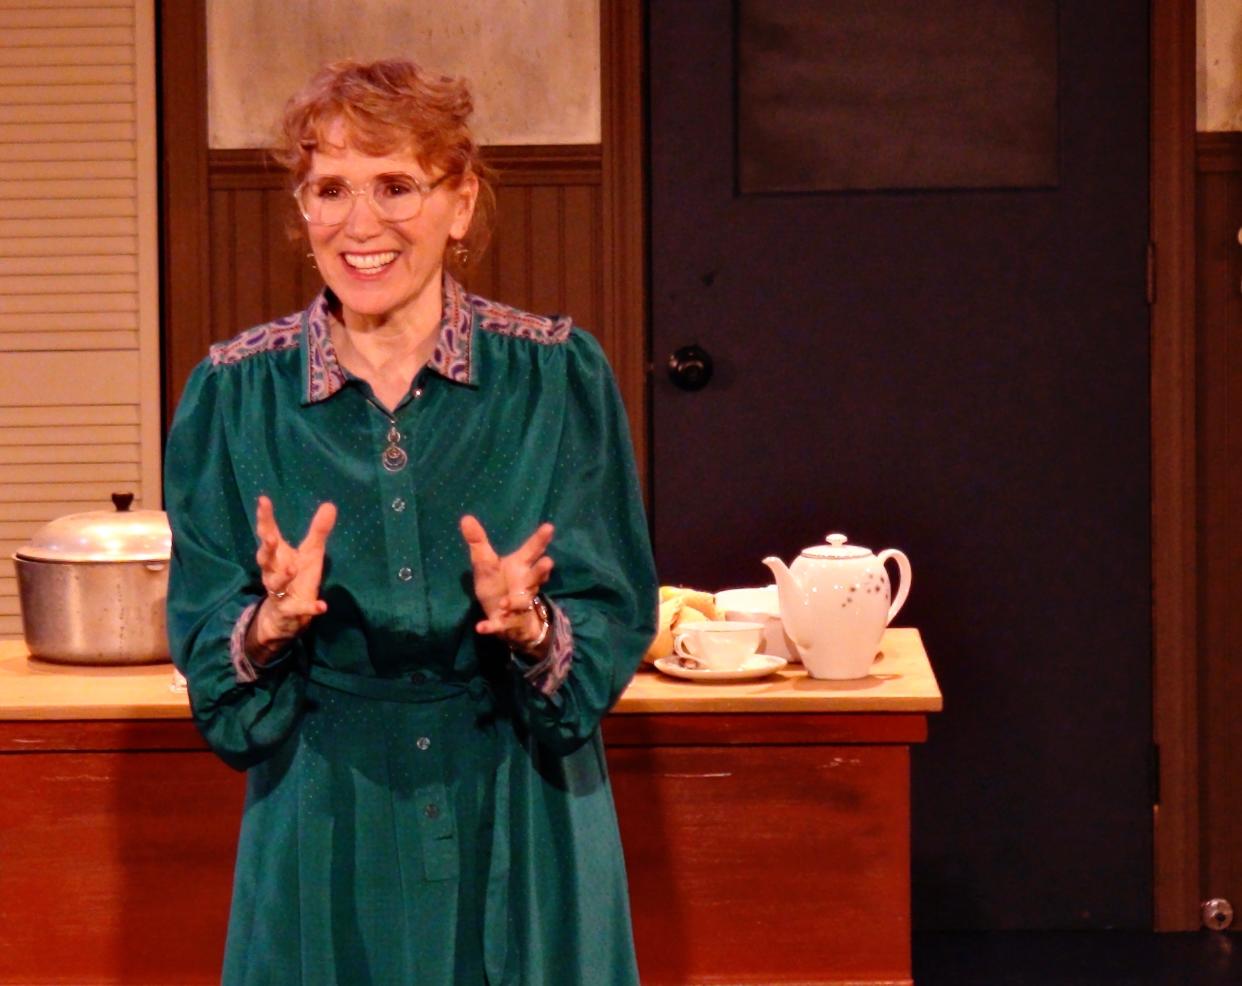 In her one-woman play, "Bella, an Immigrant's Tale," Vicki Summers portrays her Jewish refugee grandmother. She will revive the play March 20 at Cape Rep Theatre in Brewster as a fundraiser for UNICEF efforts to help Ukrainian refugees.